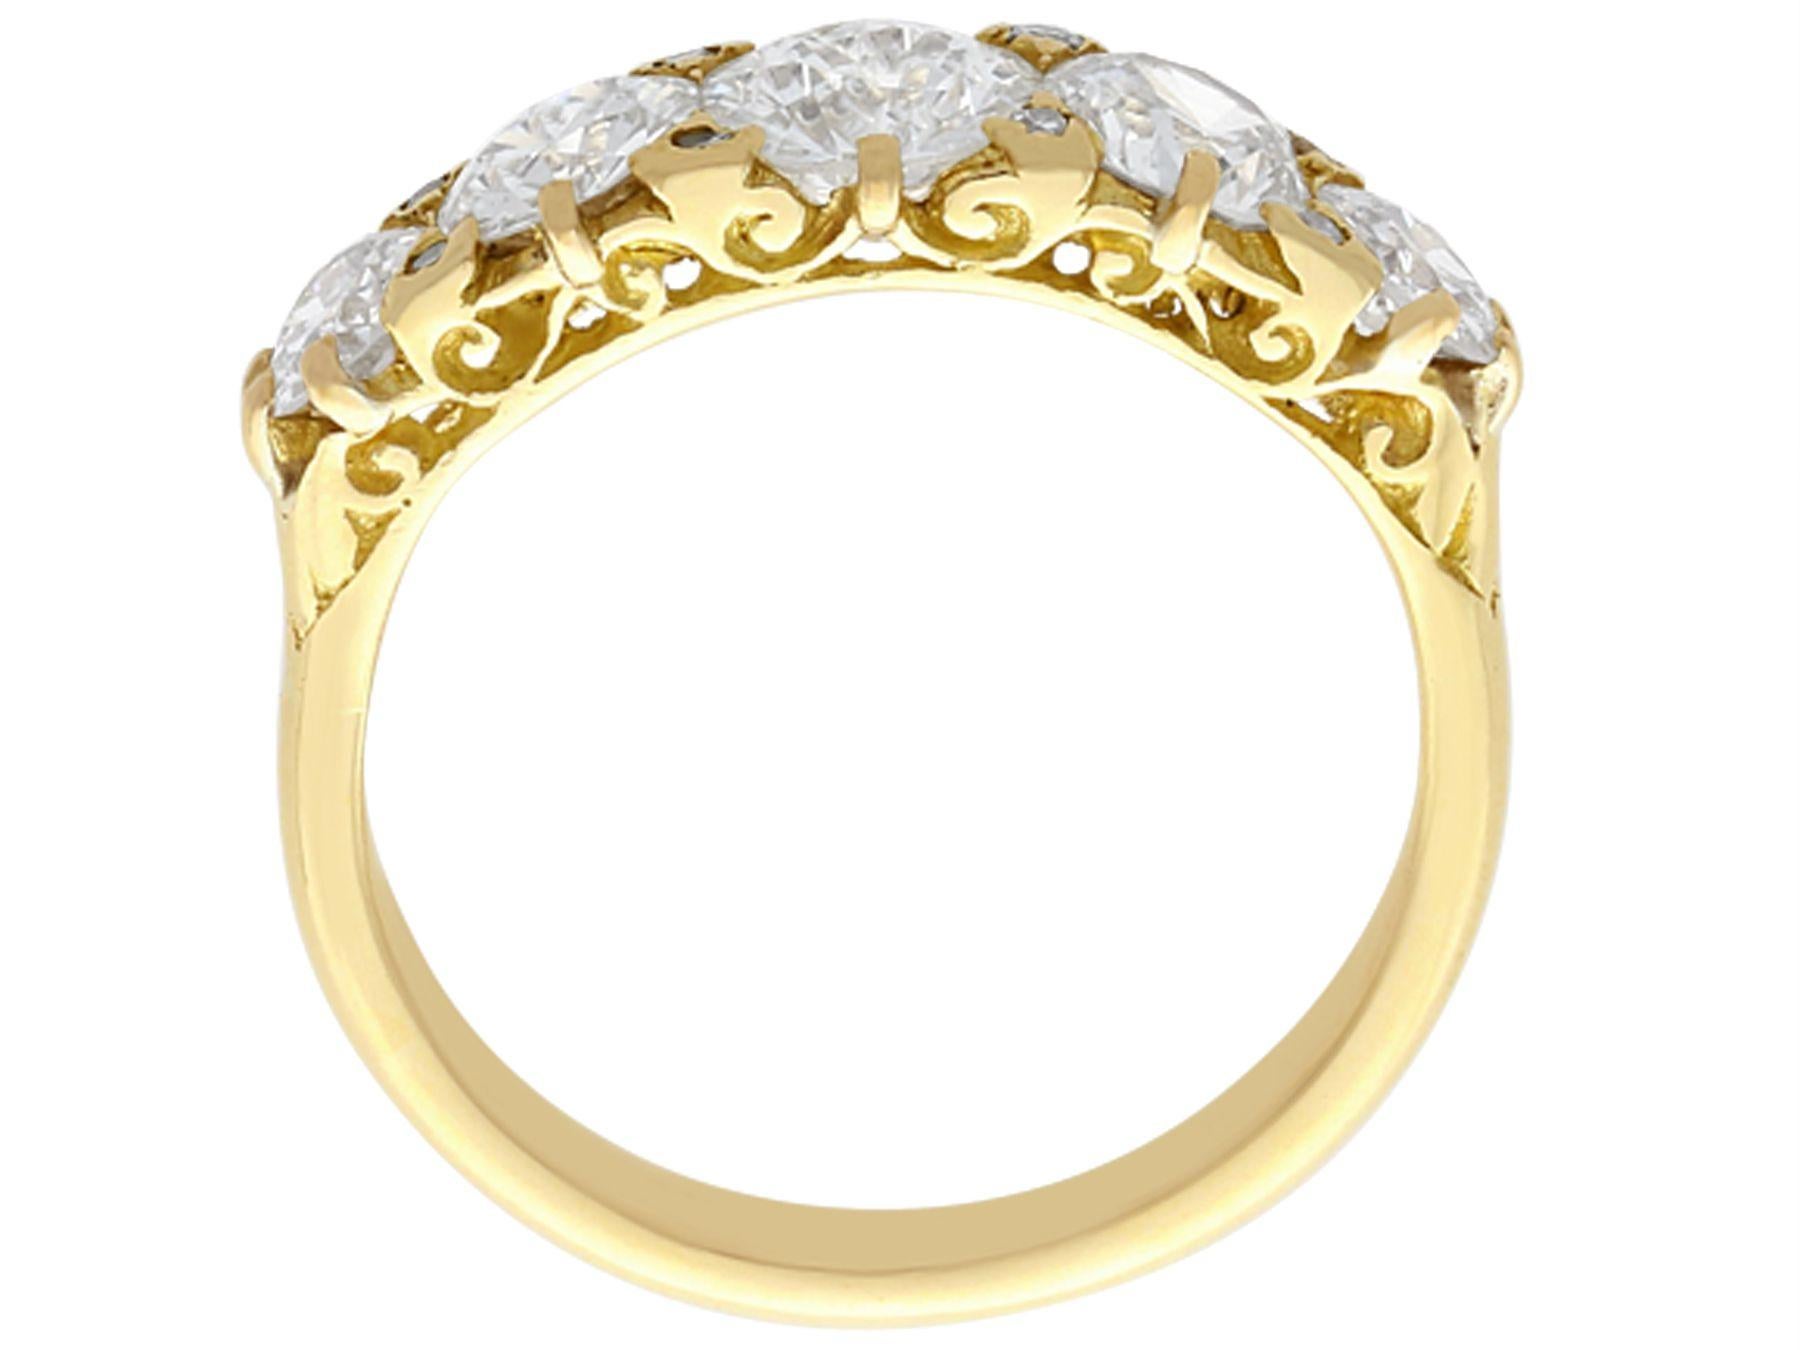 Women's or Men's Antique 3.31 Carat Diamond and 18k Yellow Gold Five Stone Ring For Sale